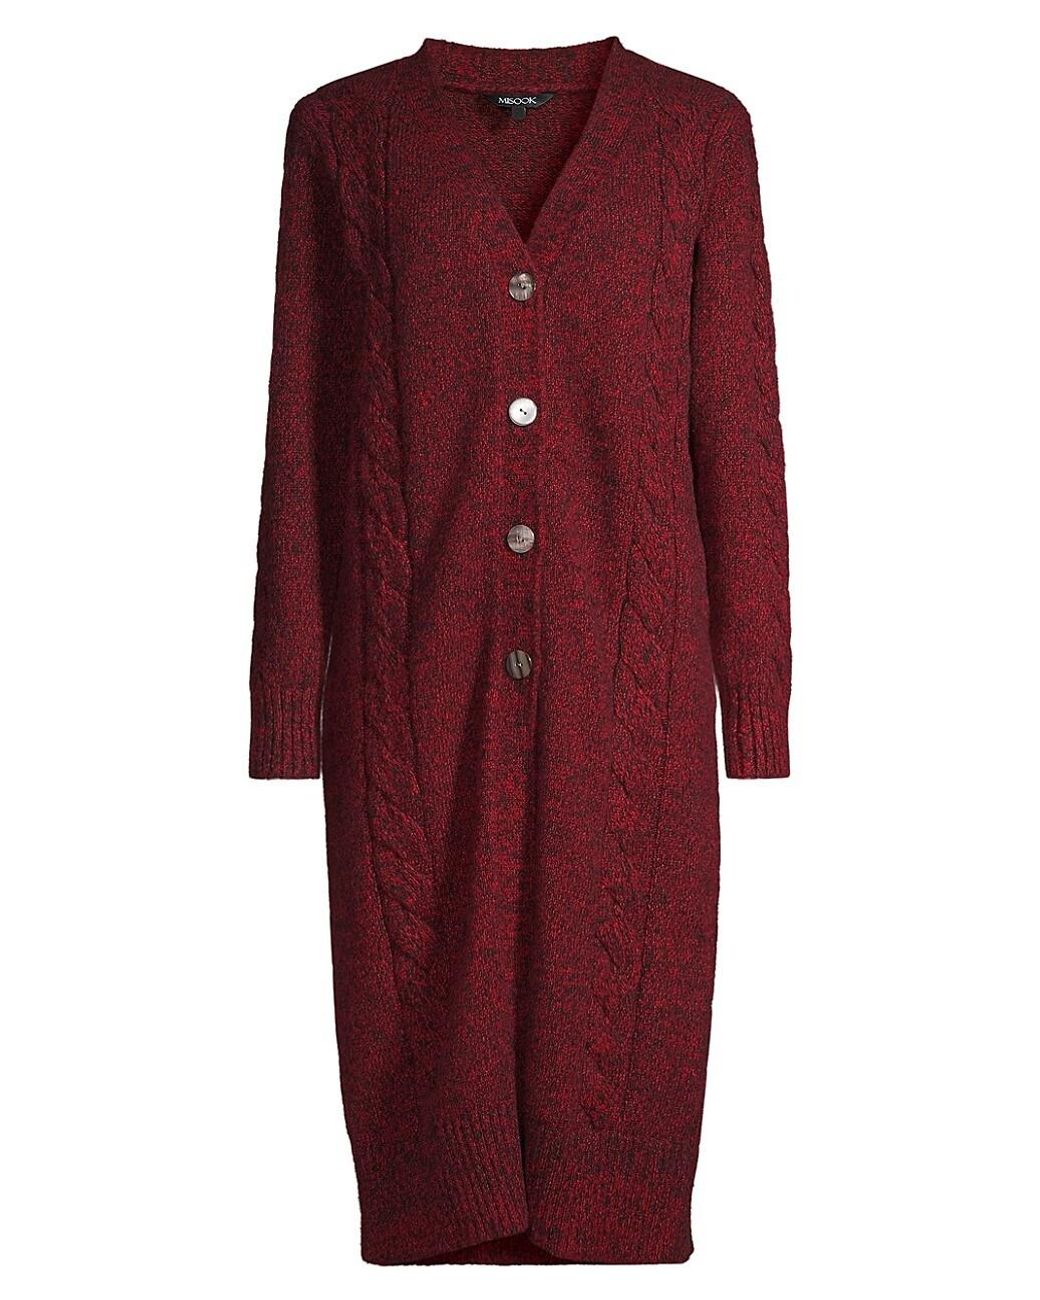 Misook Cozy Cable-knit Duster Cardigan in Red | Lyst